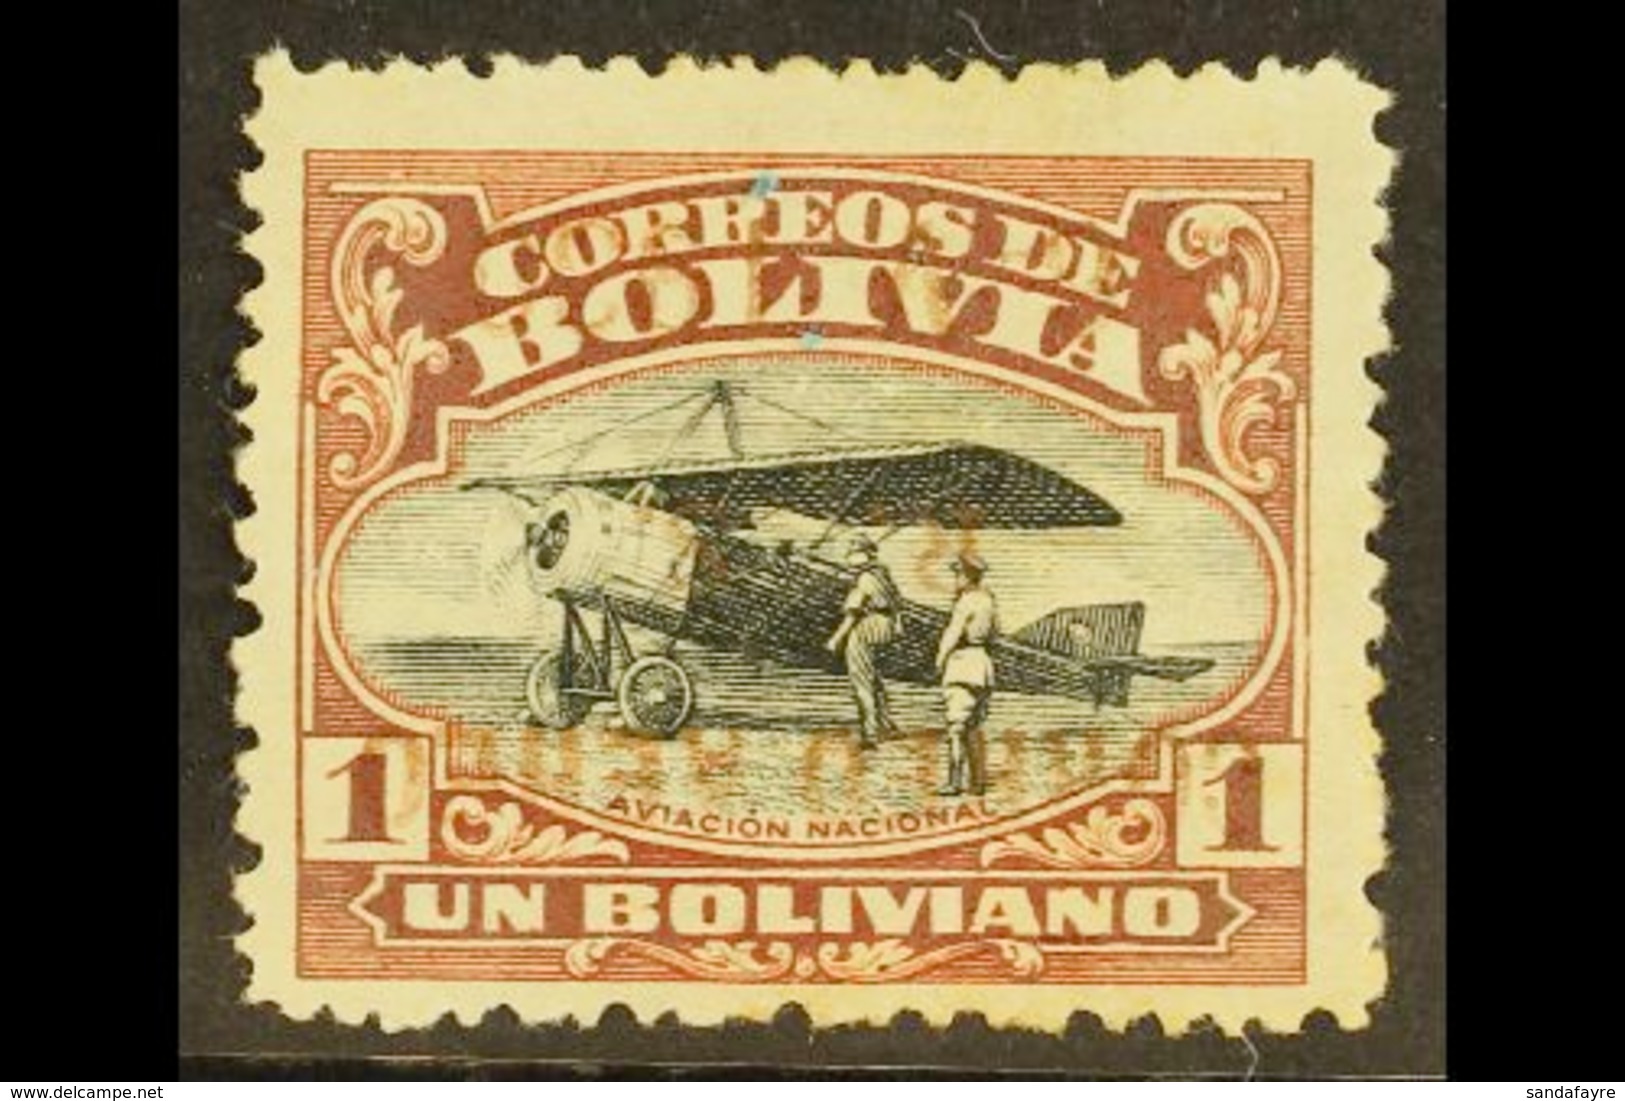 1930 1b Red-brown & Black Air Zeppelin "Correo Aereo" INVERTED OVERPRINT Variety, Scott C18a, Fine Mint, Rather Weak Ove - Bolivien